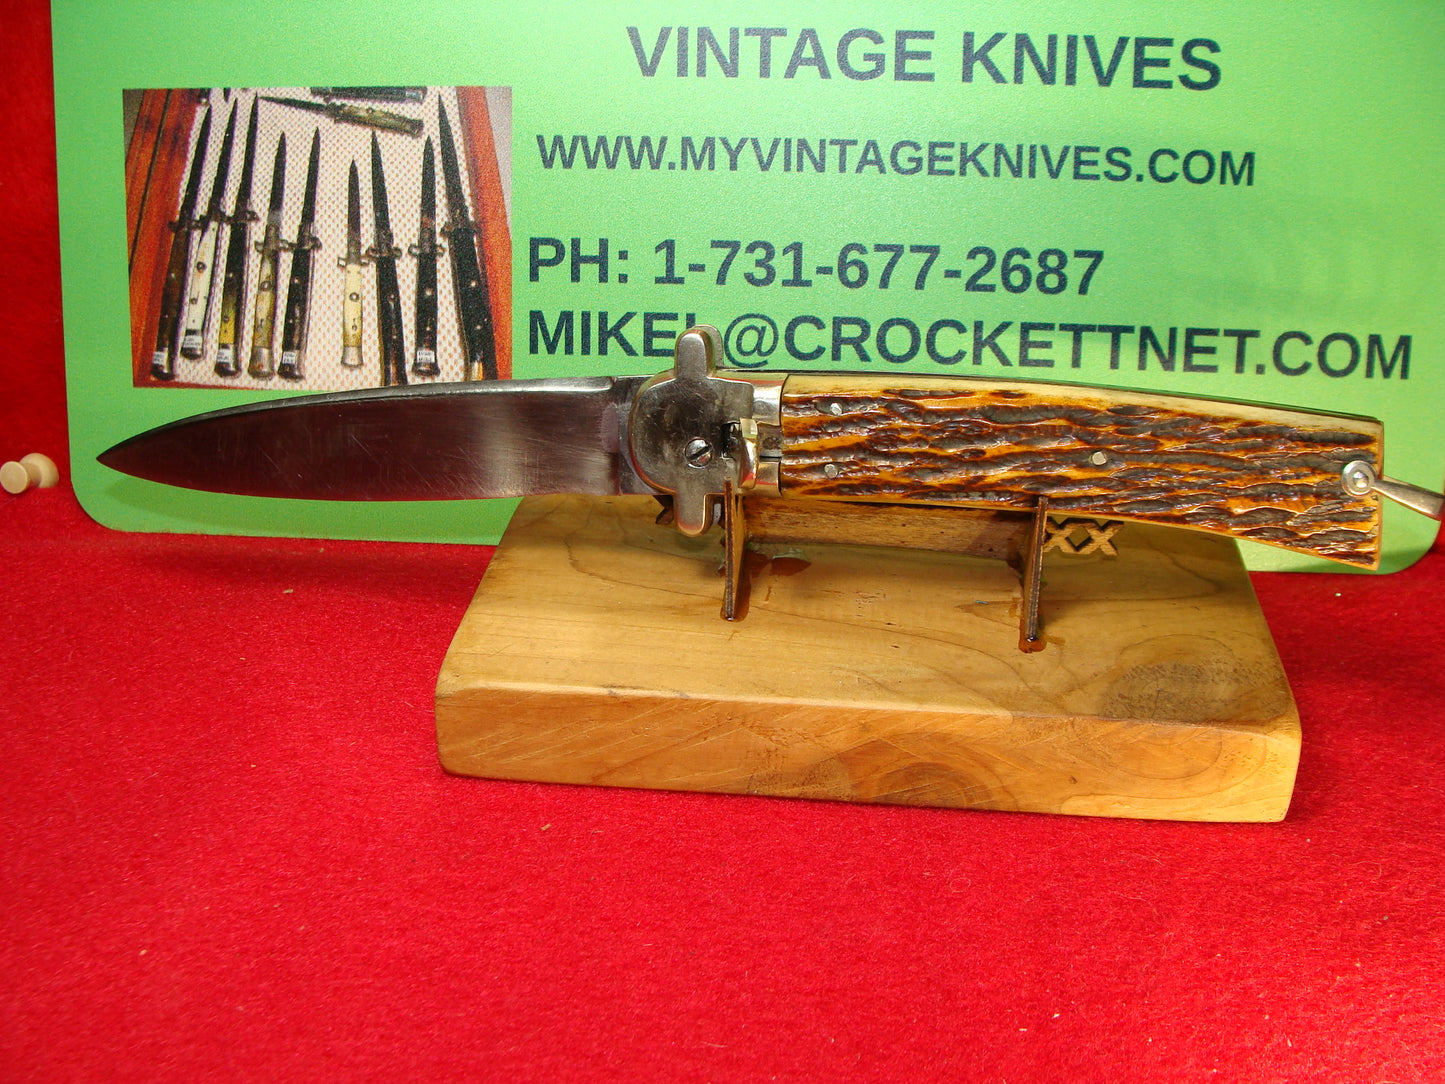 MAKI INOX FRENCH 1955-65 LEVER AUTOMATIC FIXED GUARDS FRENCH AUTOMATIC KNIFE JIGGED BONE HANDLES